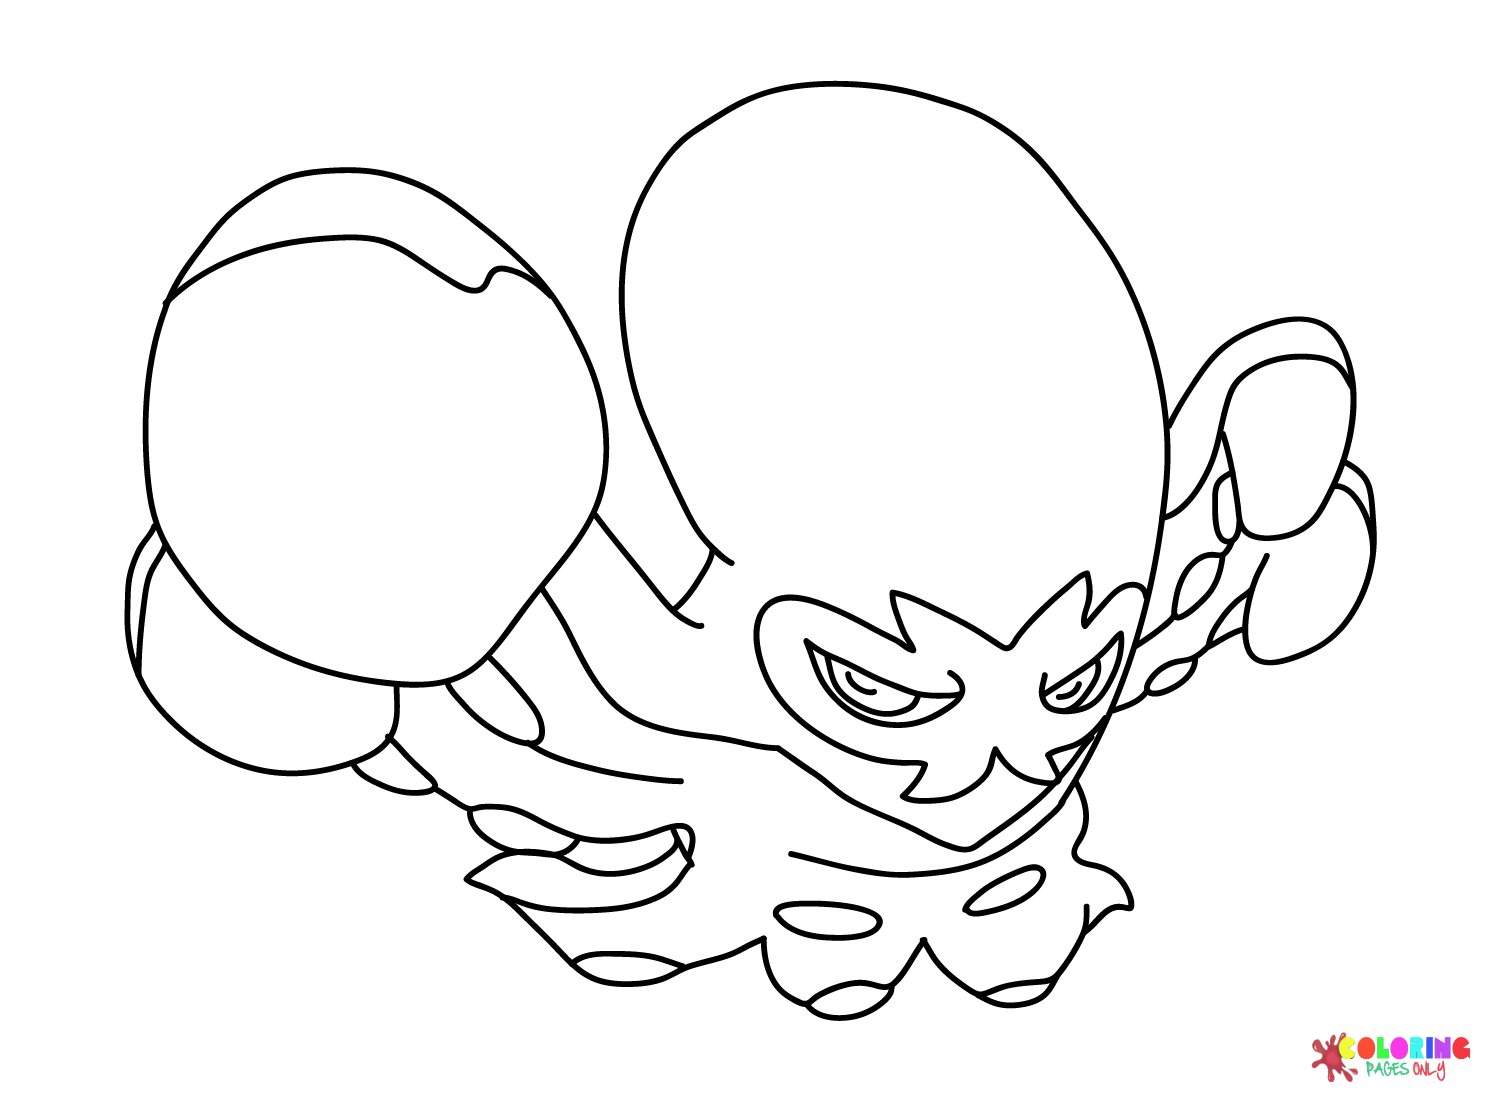 Grapploct Attack Coloring Page